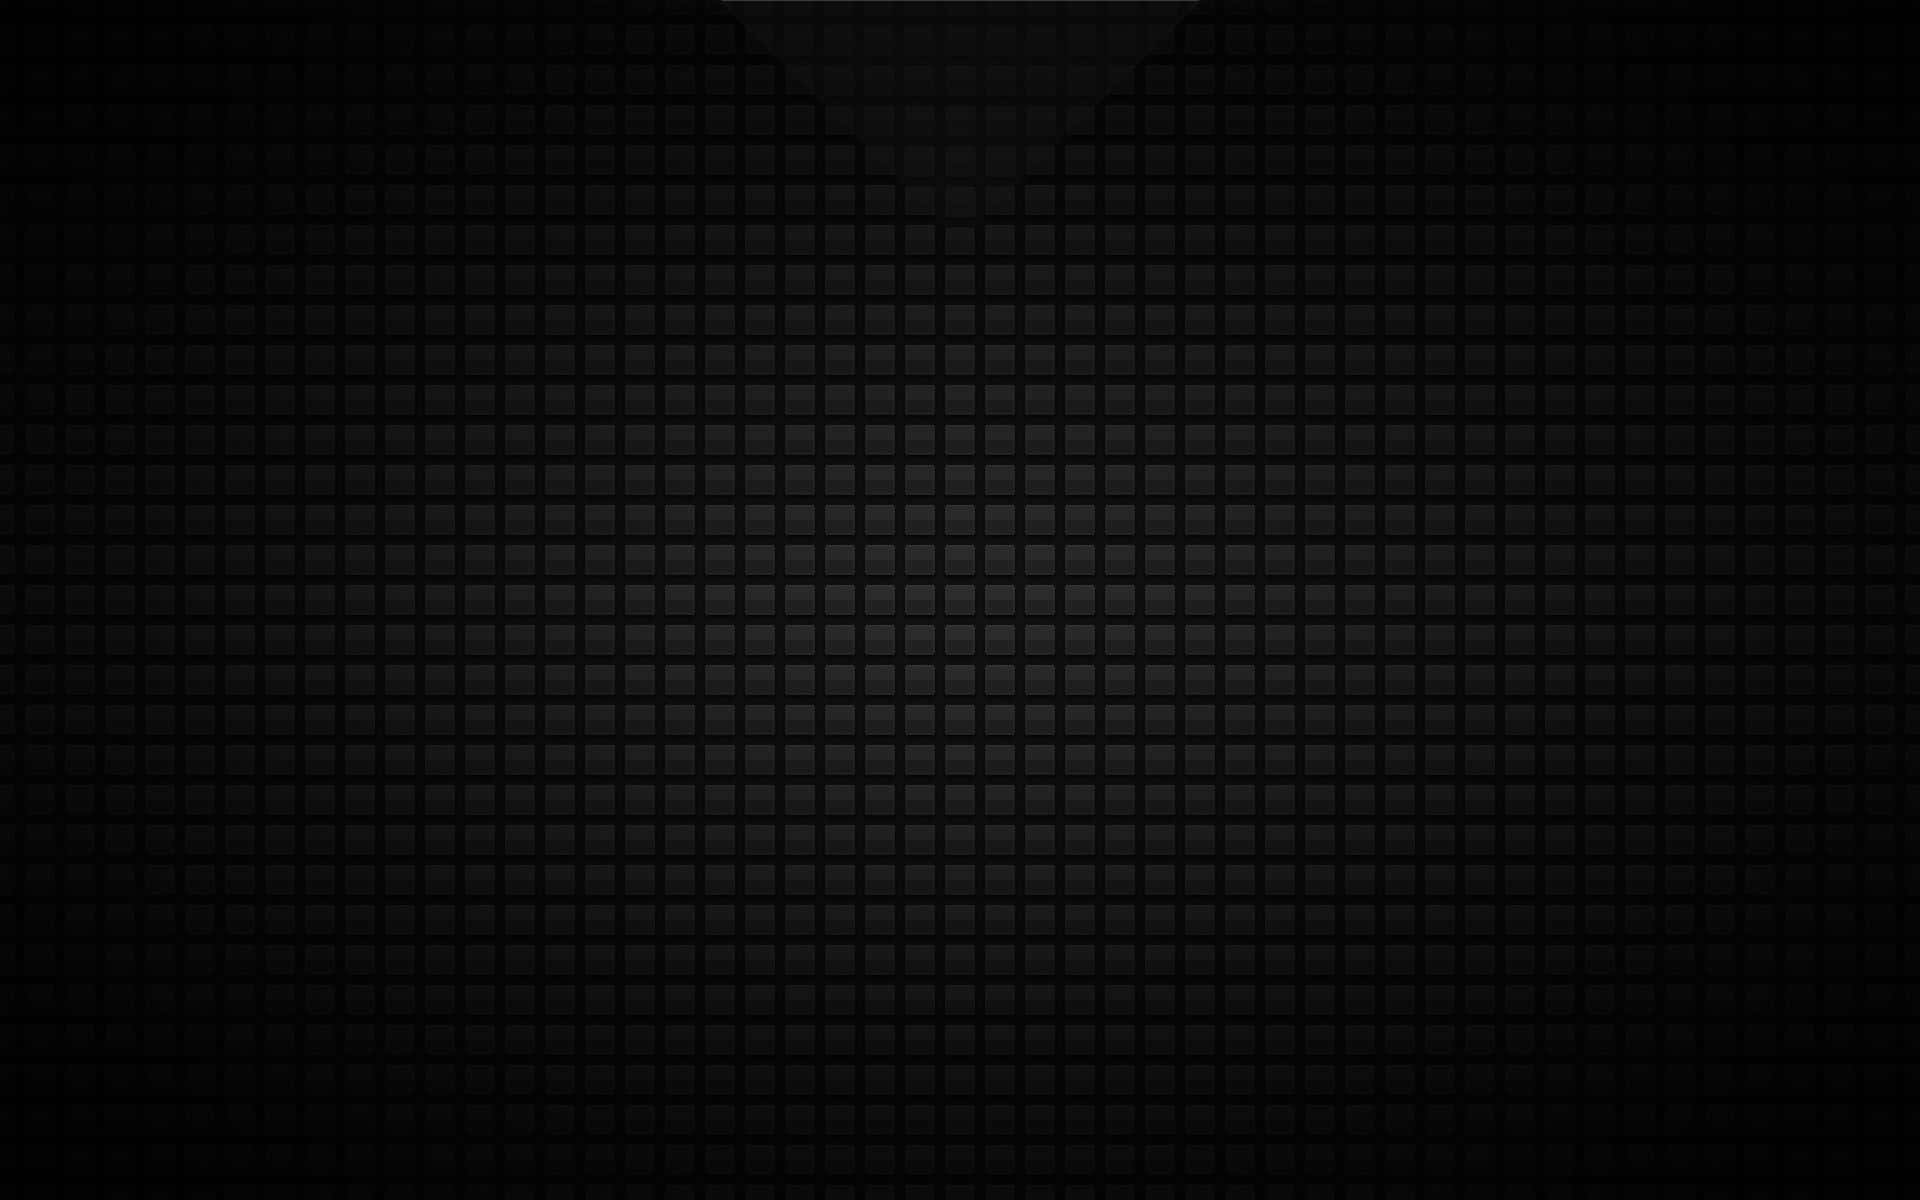 A Black Background With A Square Shape